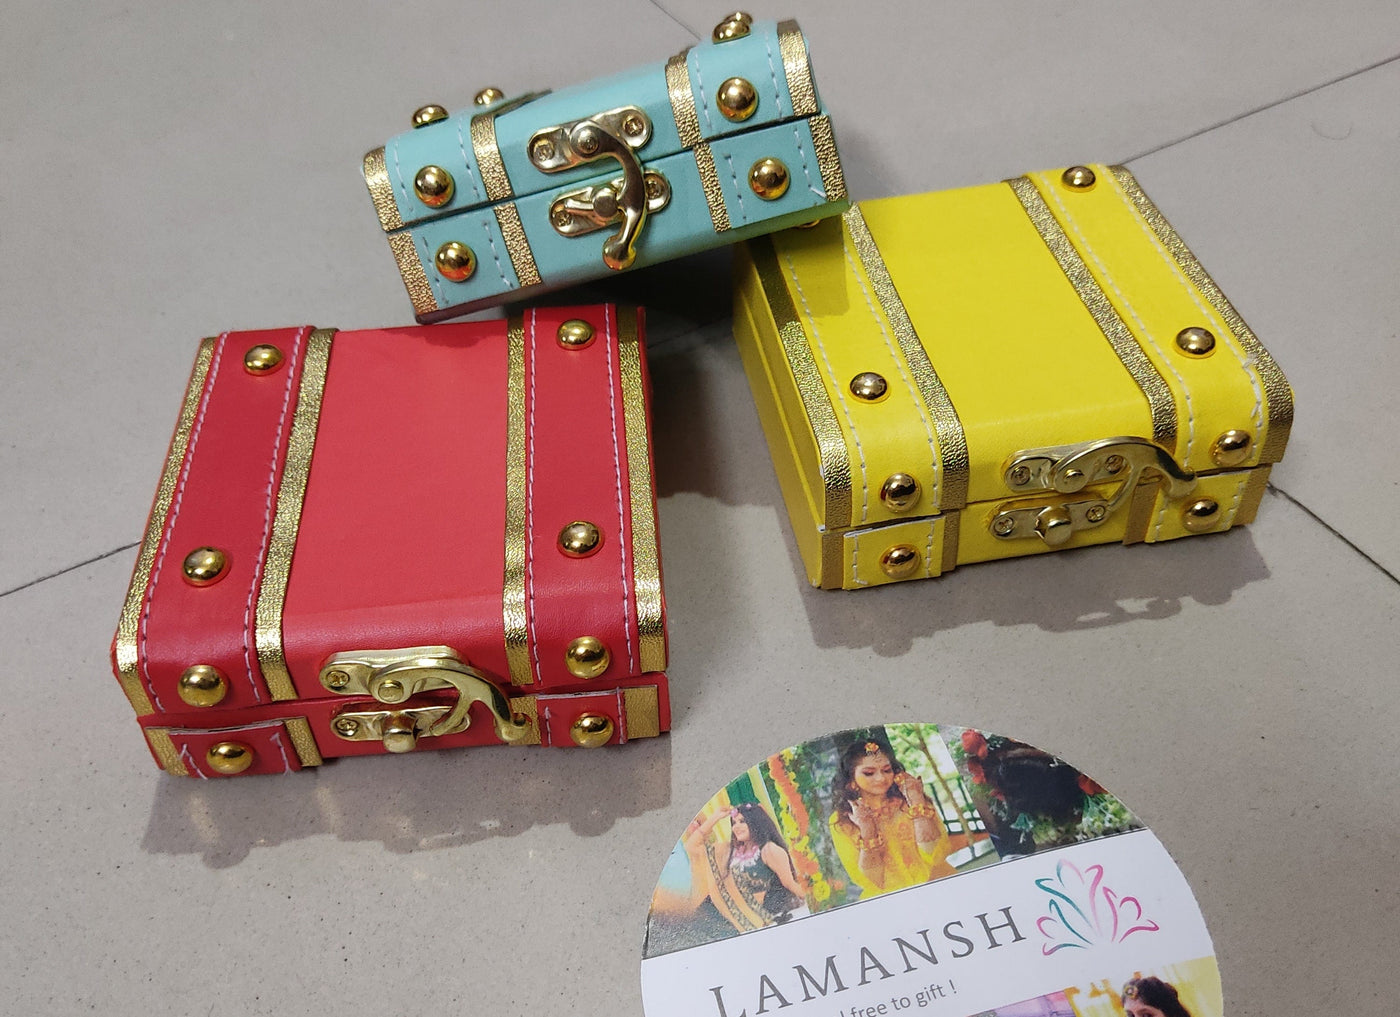 Lamansh leatherite boxes Pack of 100 pcs (4*4*1.5 inch) Leatherette mini trunk boxes for gifting 🎁 / small leatherite lock boxes for wedding favors / cute gift ideas for family & friends